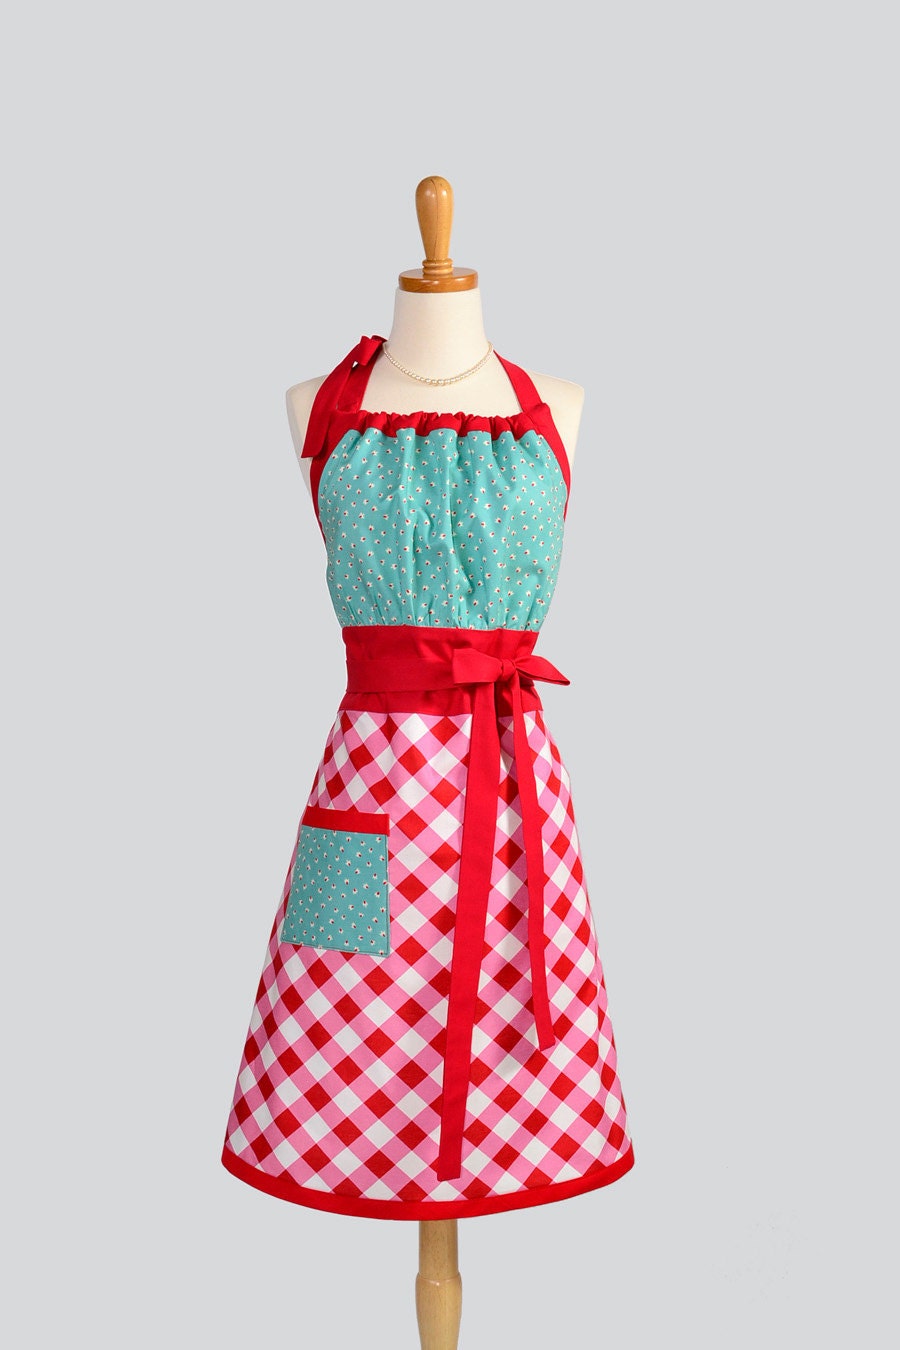 Cute Kitsch Retro Apron / Handmade Full Retro Womens Apron in Red Gingham and Turquoise Bodice